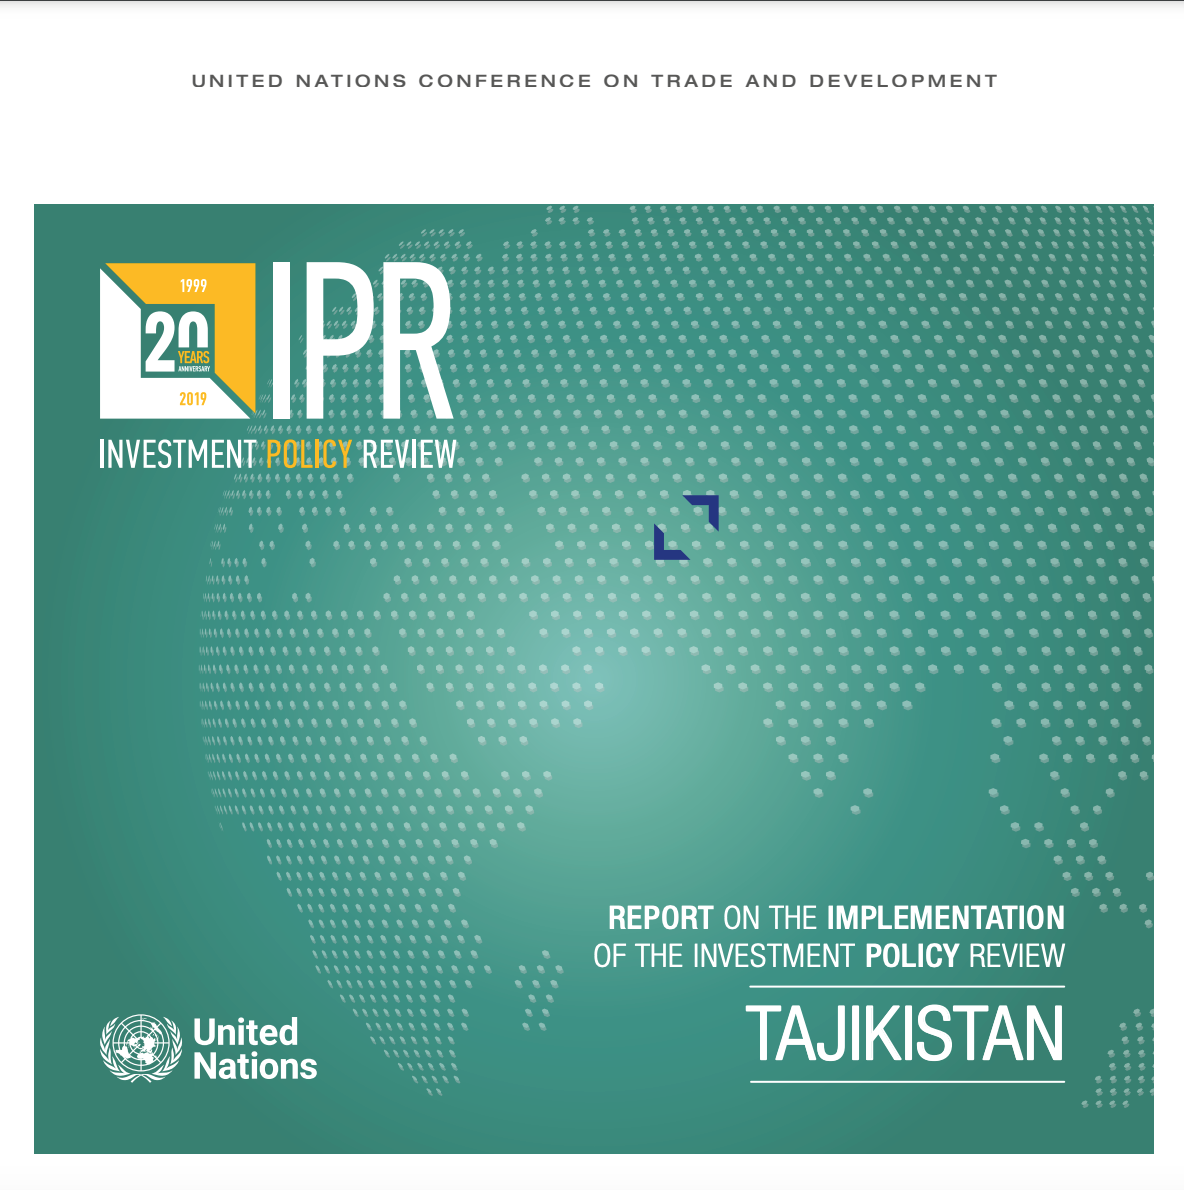 Report on the Implementation of the Investment Policy Review of Tajikistan